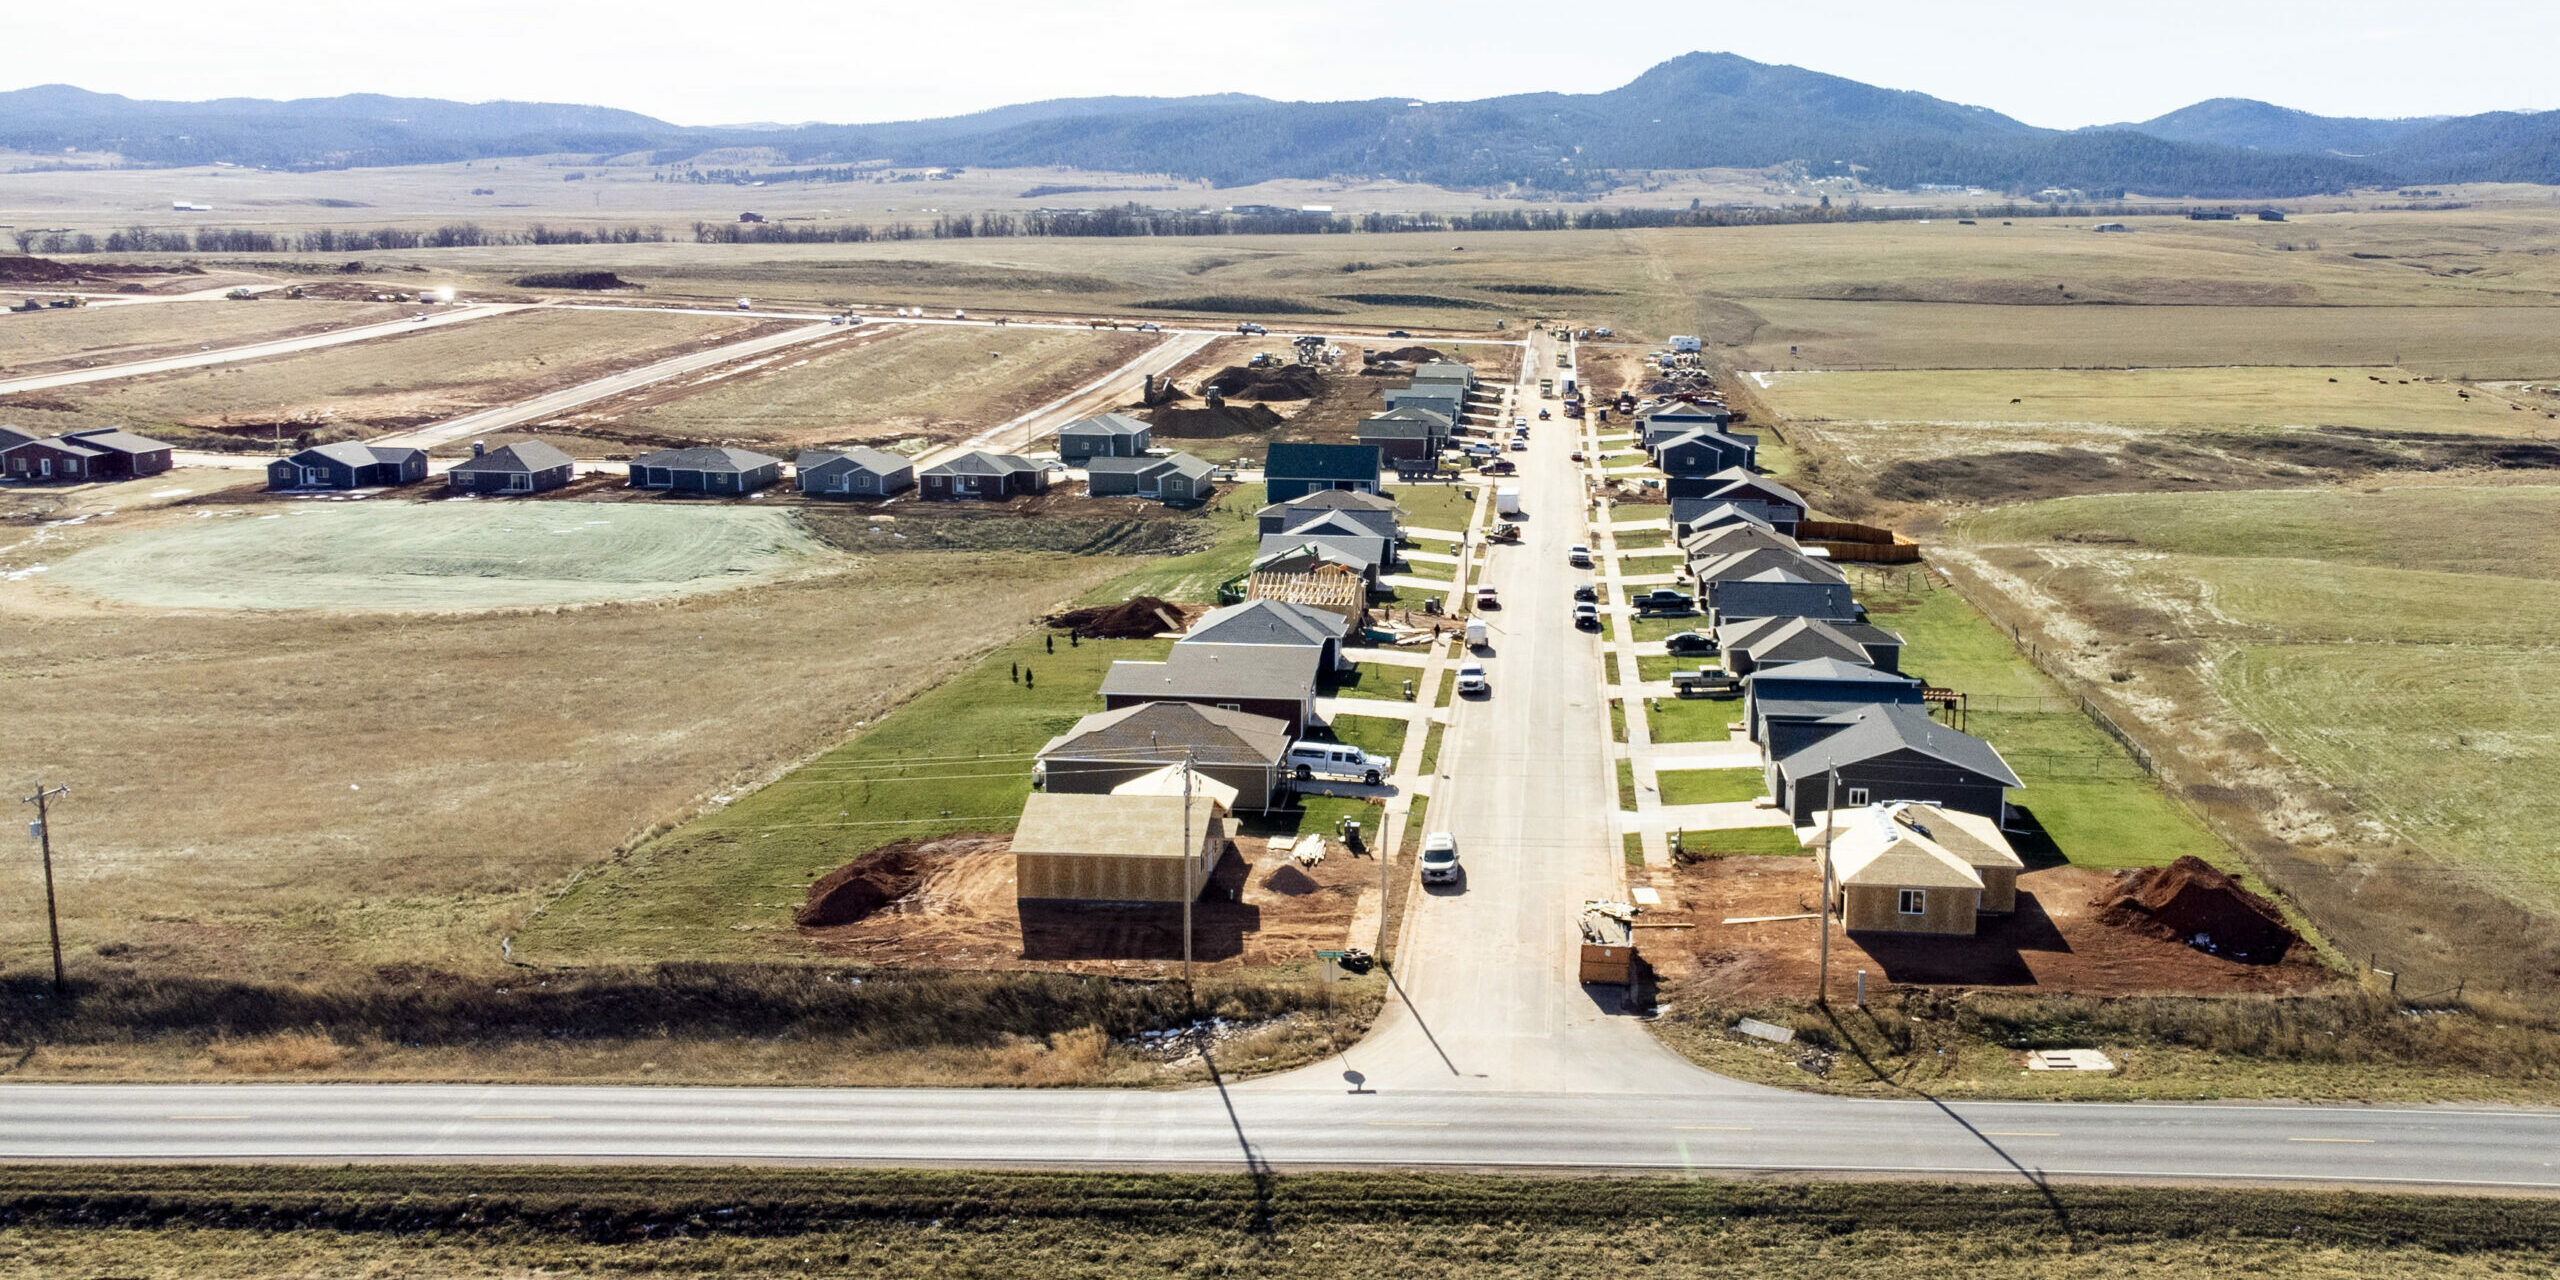 Phase 1 of Sky Ridge homes for sale in Spearfish, South Dakota